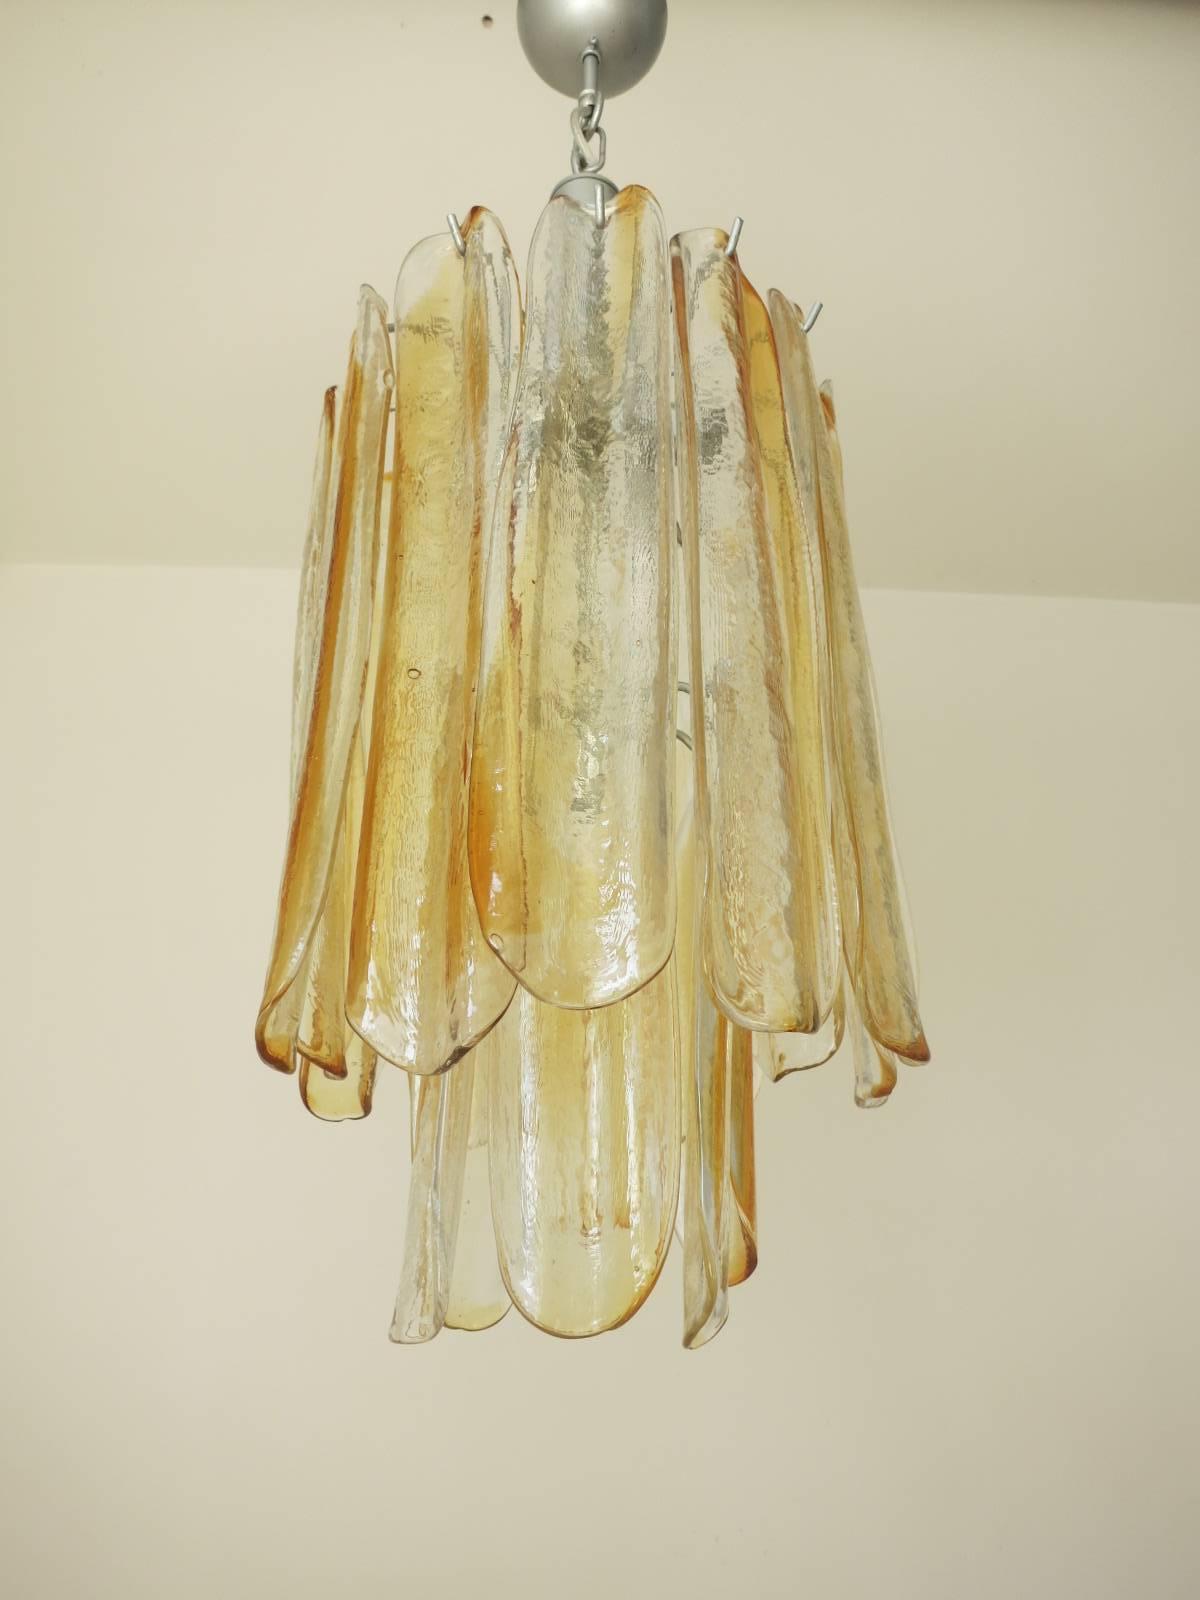 Vintage Italian chandelier with 18 infused amber and clear Murano glass pedals stacked in two tiers, mounted on nickel painted metal / Designed by Mazzega circa 1960’s/  Made in Italy
5 lights / E12 or E14 type / max 40W each
Diameter: 10 inches /